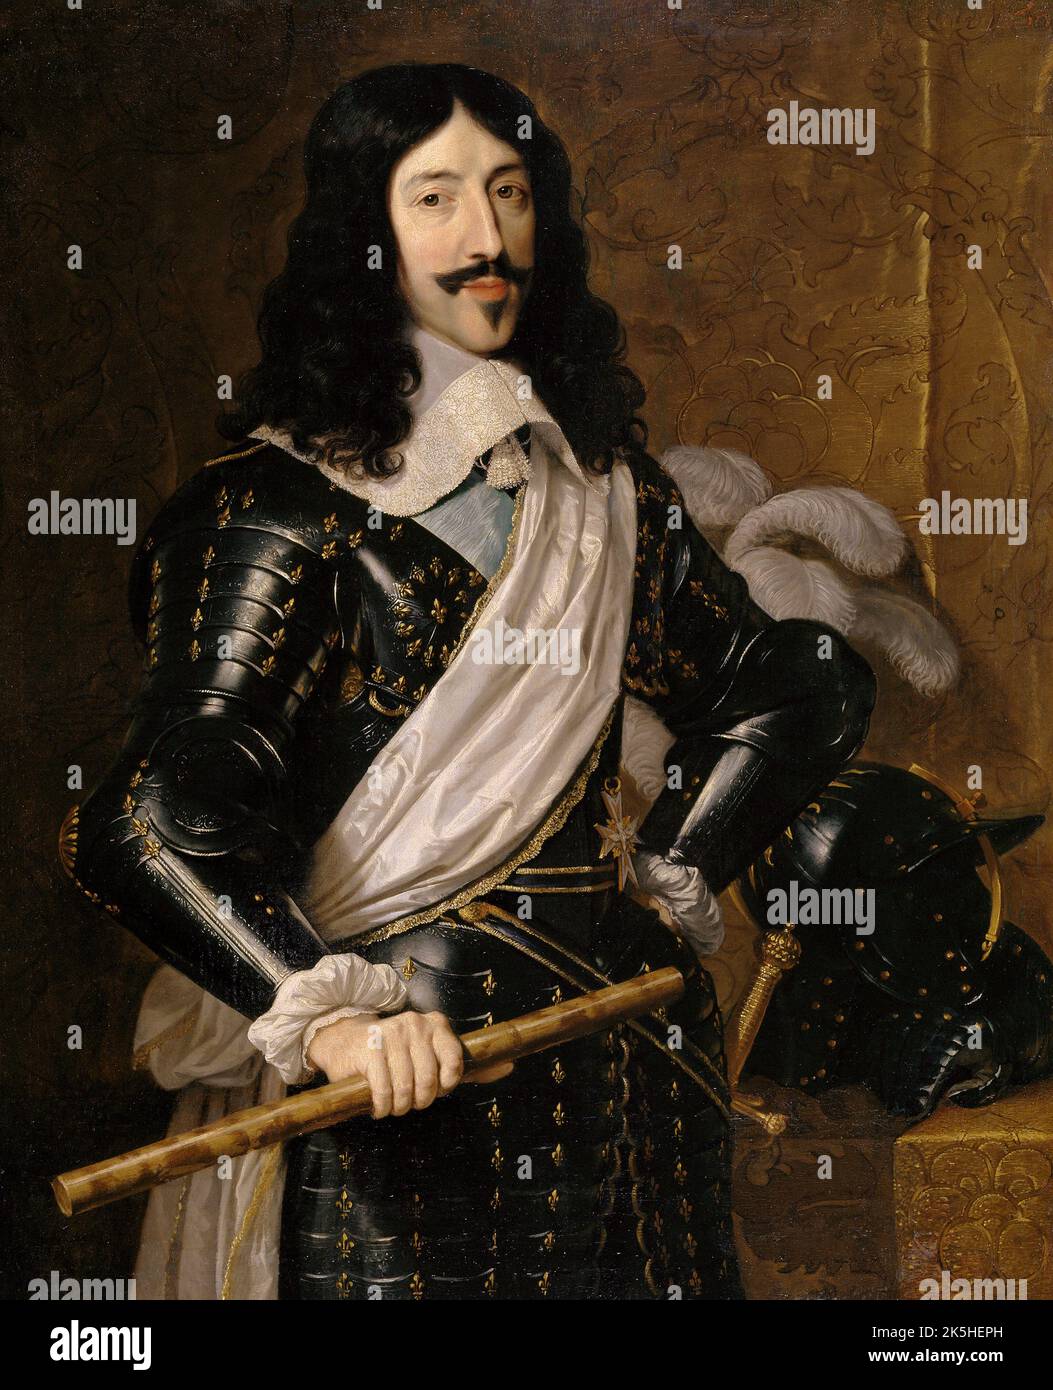 Louis XIII Luis XIII, rey de Francia (Philippe de Champaigne) Philippe de Champaigne Louis XIII (1601 – 1643) King of France from 1610 until his death in 1643 and King of Navarre (as Louis II) from 1610 to 1620 Stock Photo